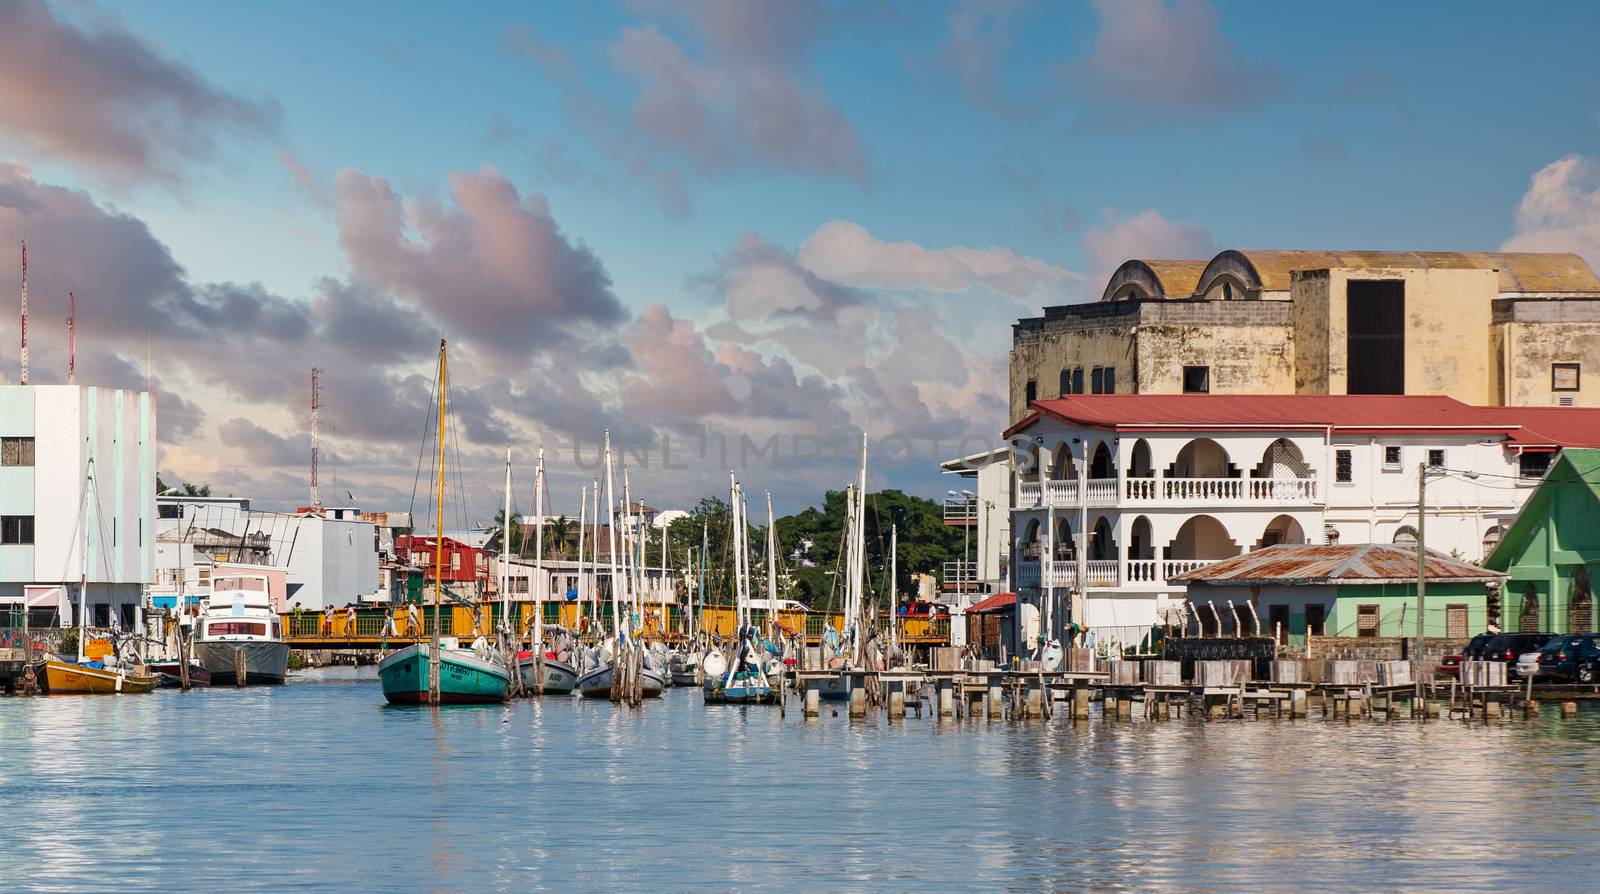 BELIZE CITY, BELIZE - December 10, 2012: Belize is a nation on the east coast of Central America, with Caribbean Sea shorelines to the east and the Belize Barrier Reef, hosts rich marine life.